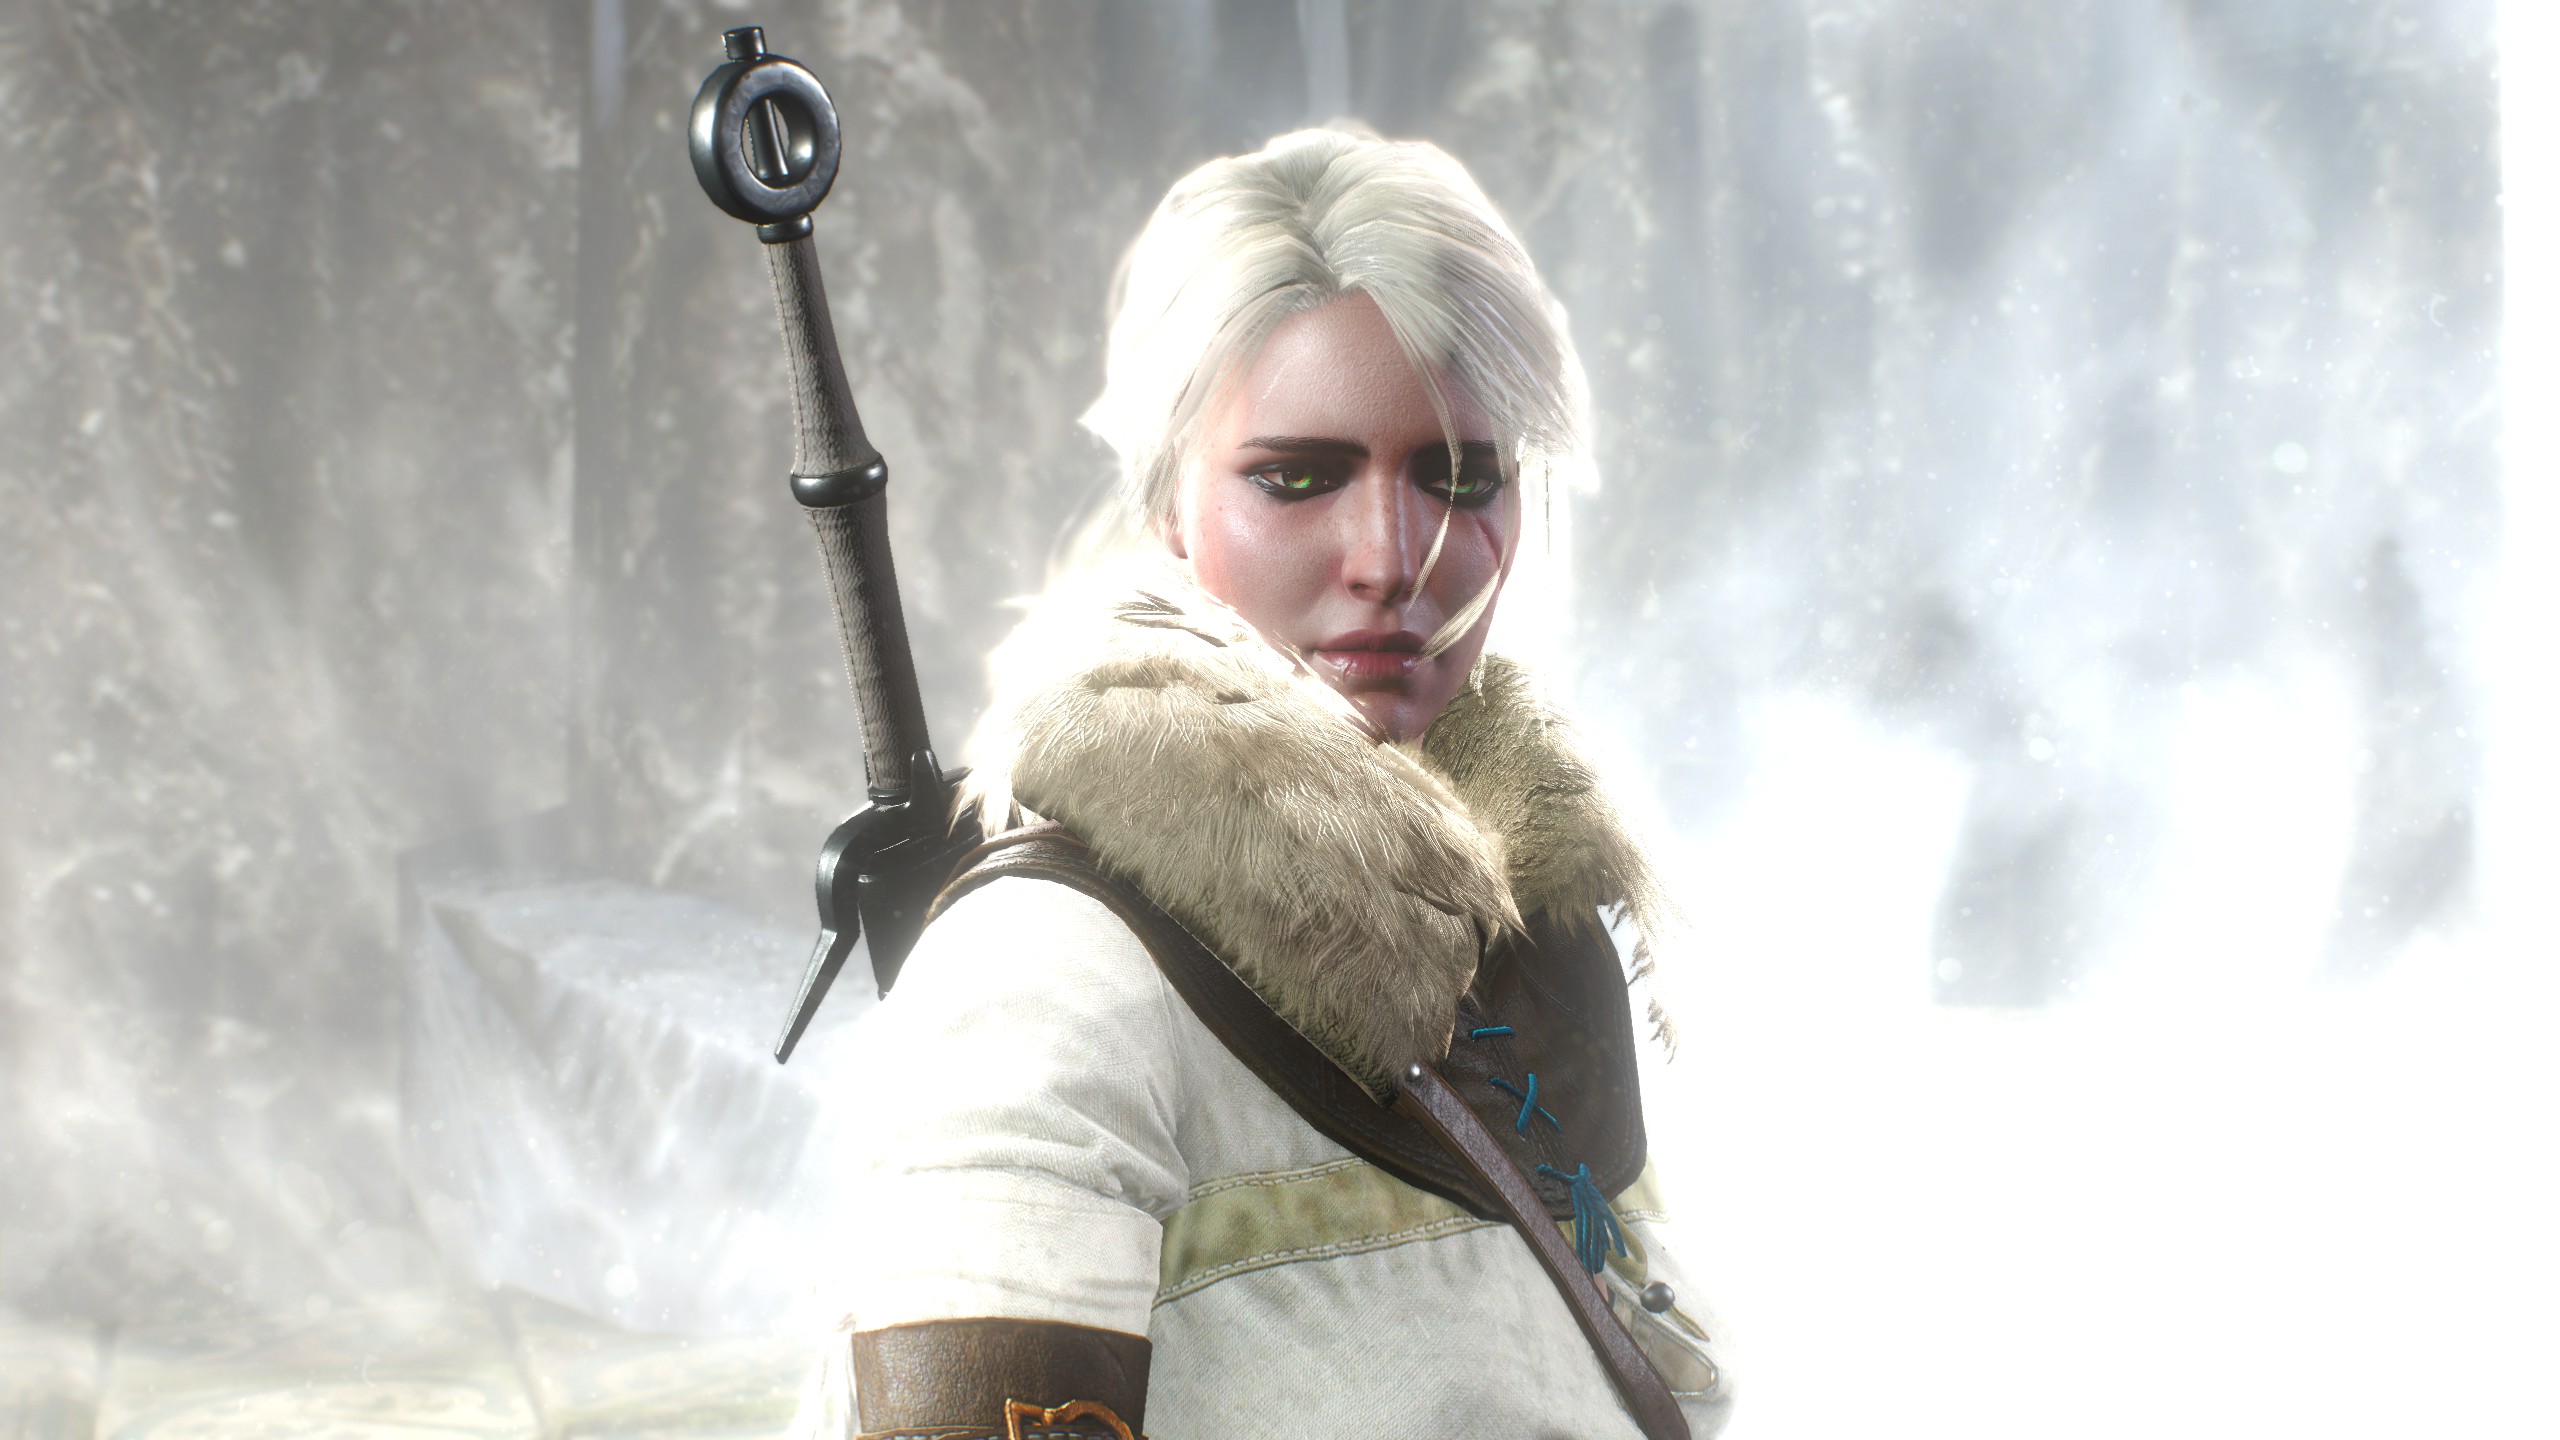 General 2560x1440 The Witcher Cirilla Fiona Elen Riannon video game characters video games